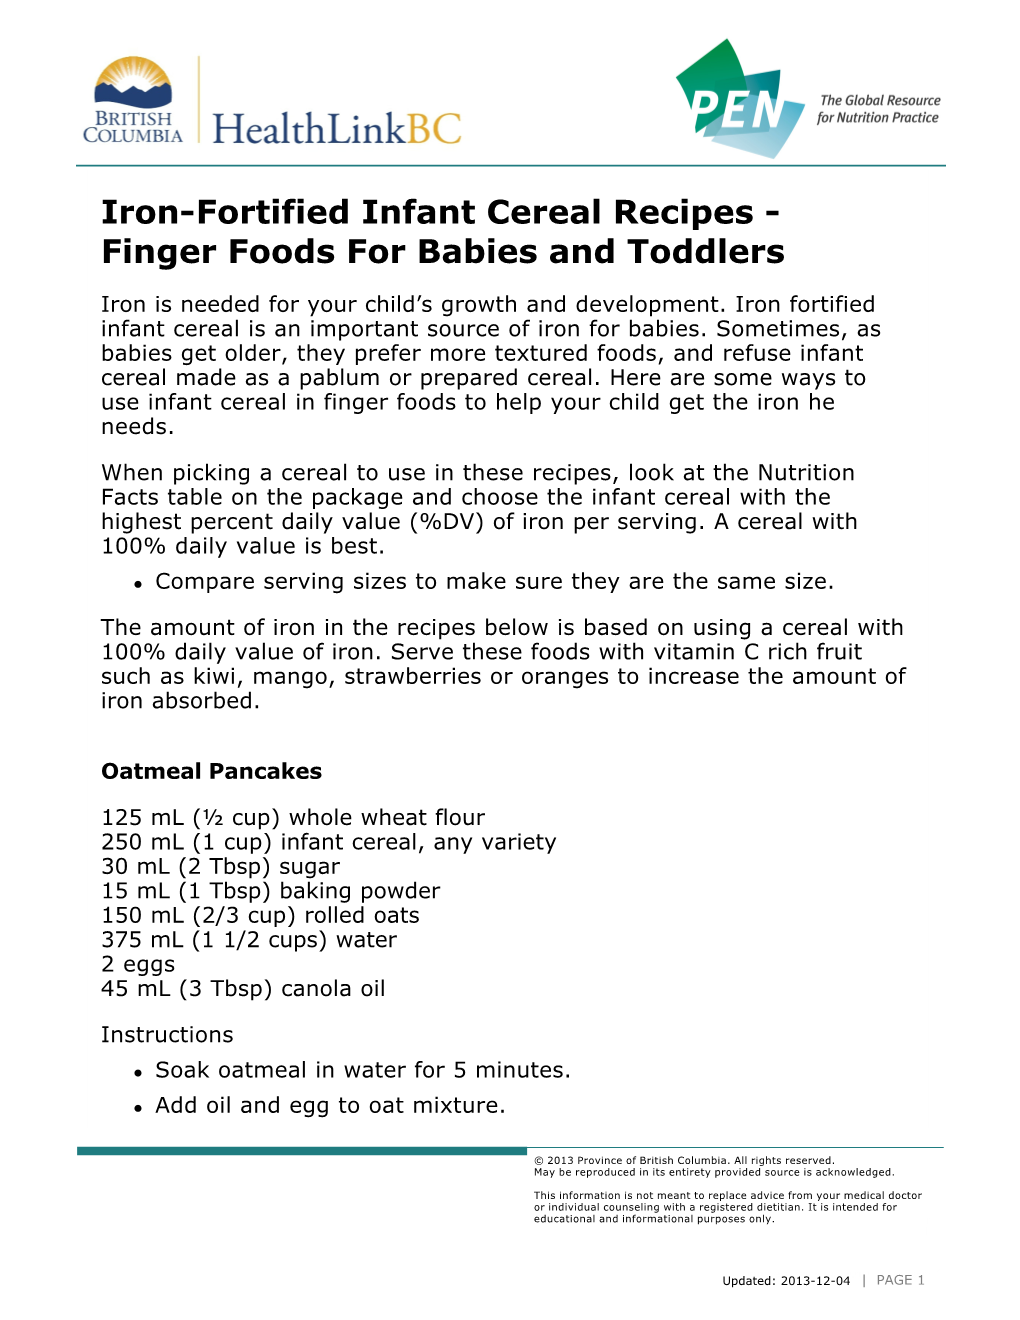 Iron-Fortified Infant Cereal Recipes - Finger Foods for Babies and Toddlers